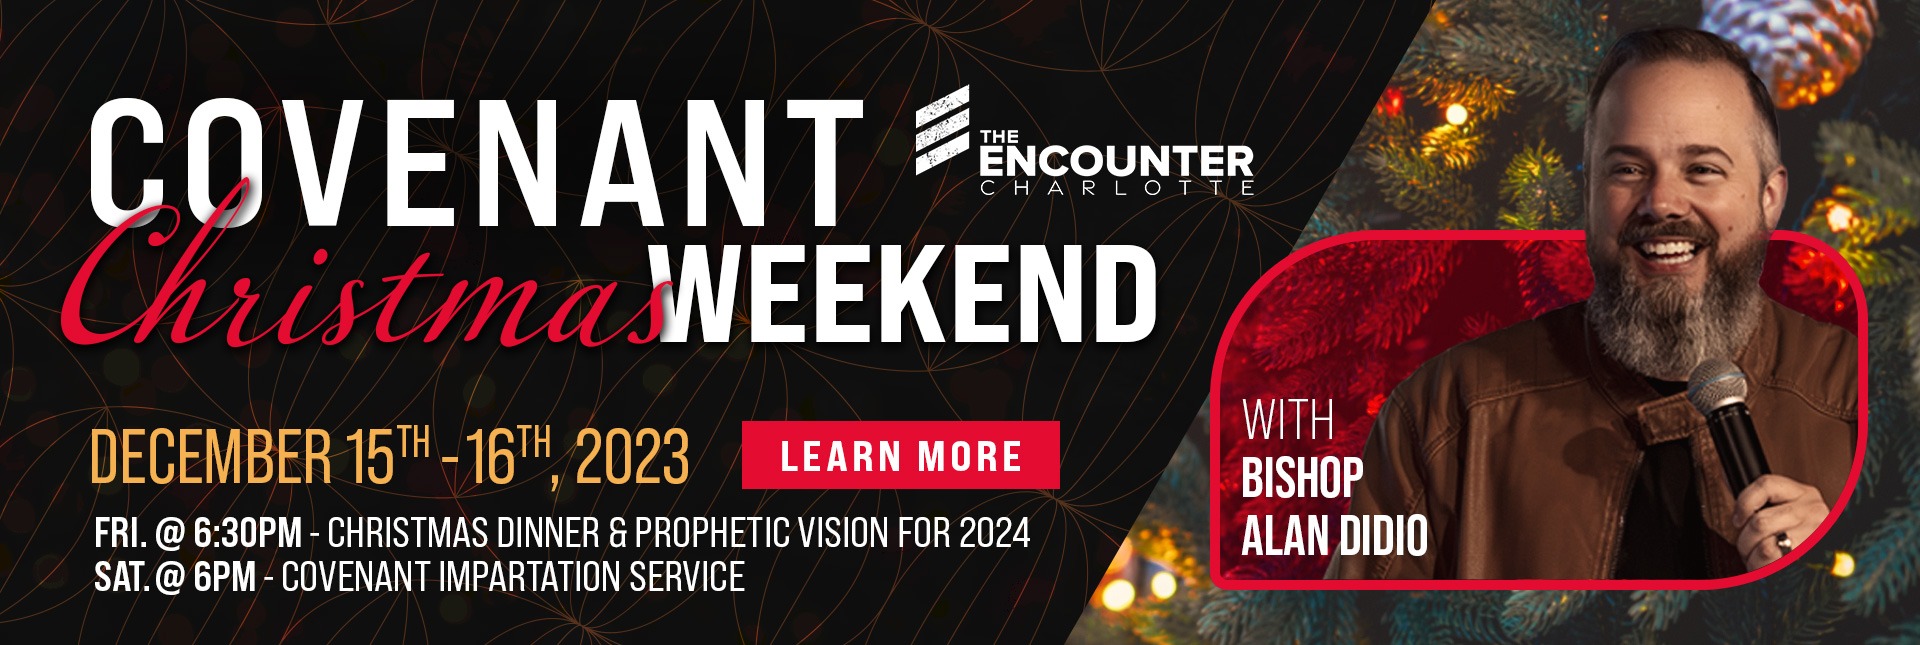 Covenant Christmas Weekend - December 15-16 2023 - Event - Encounter Today